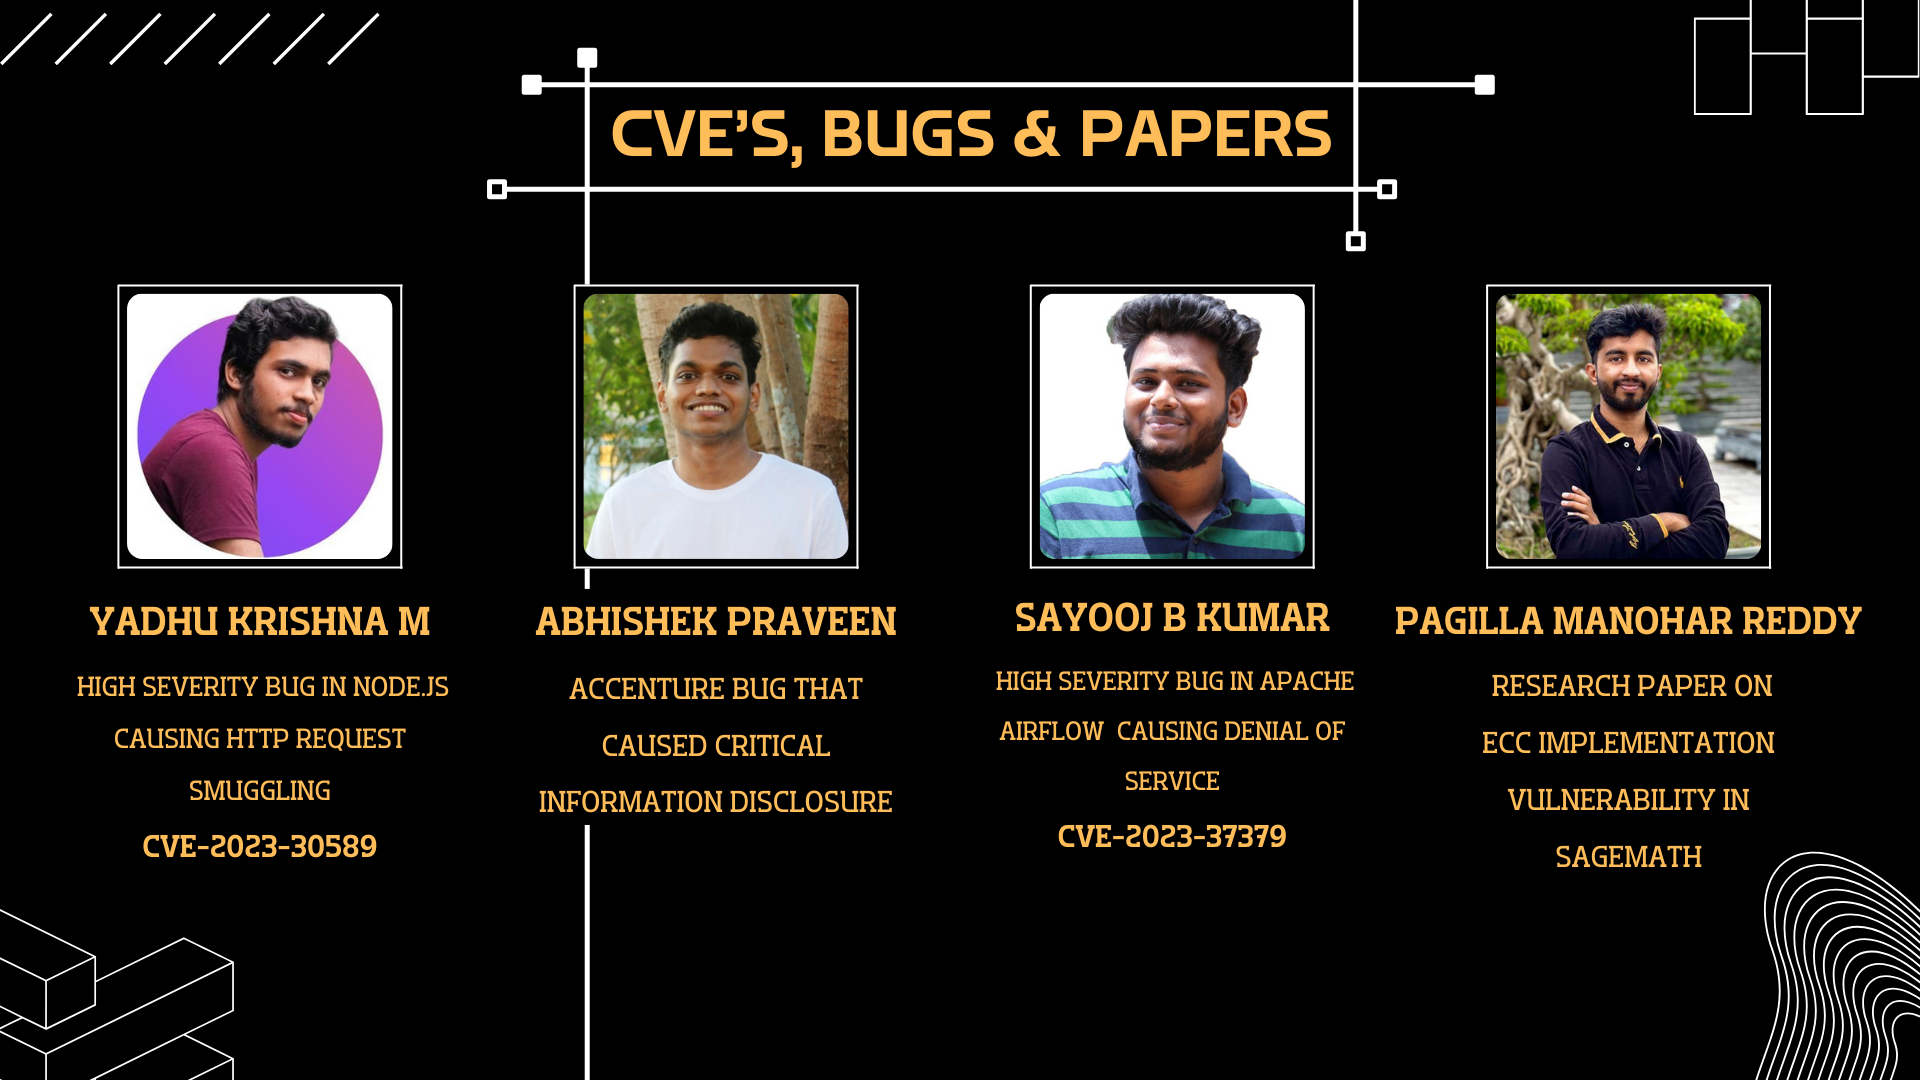 CVEs, Bugs & Papers